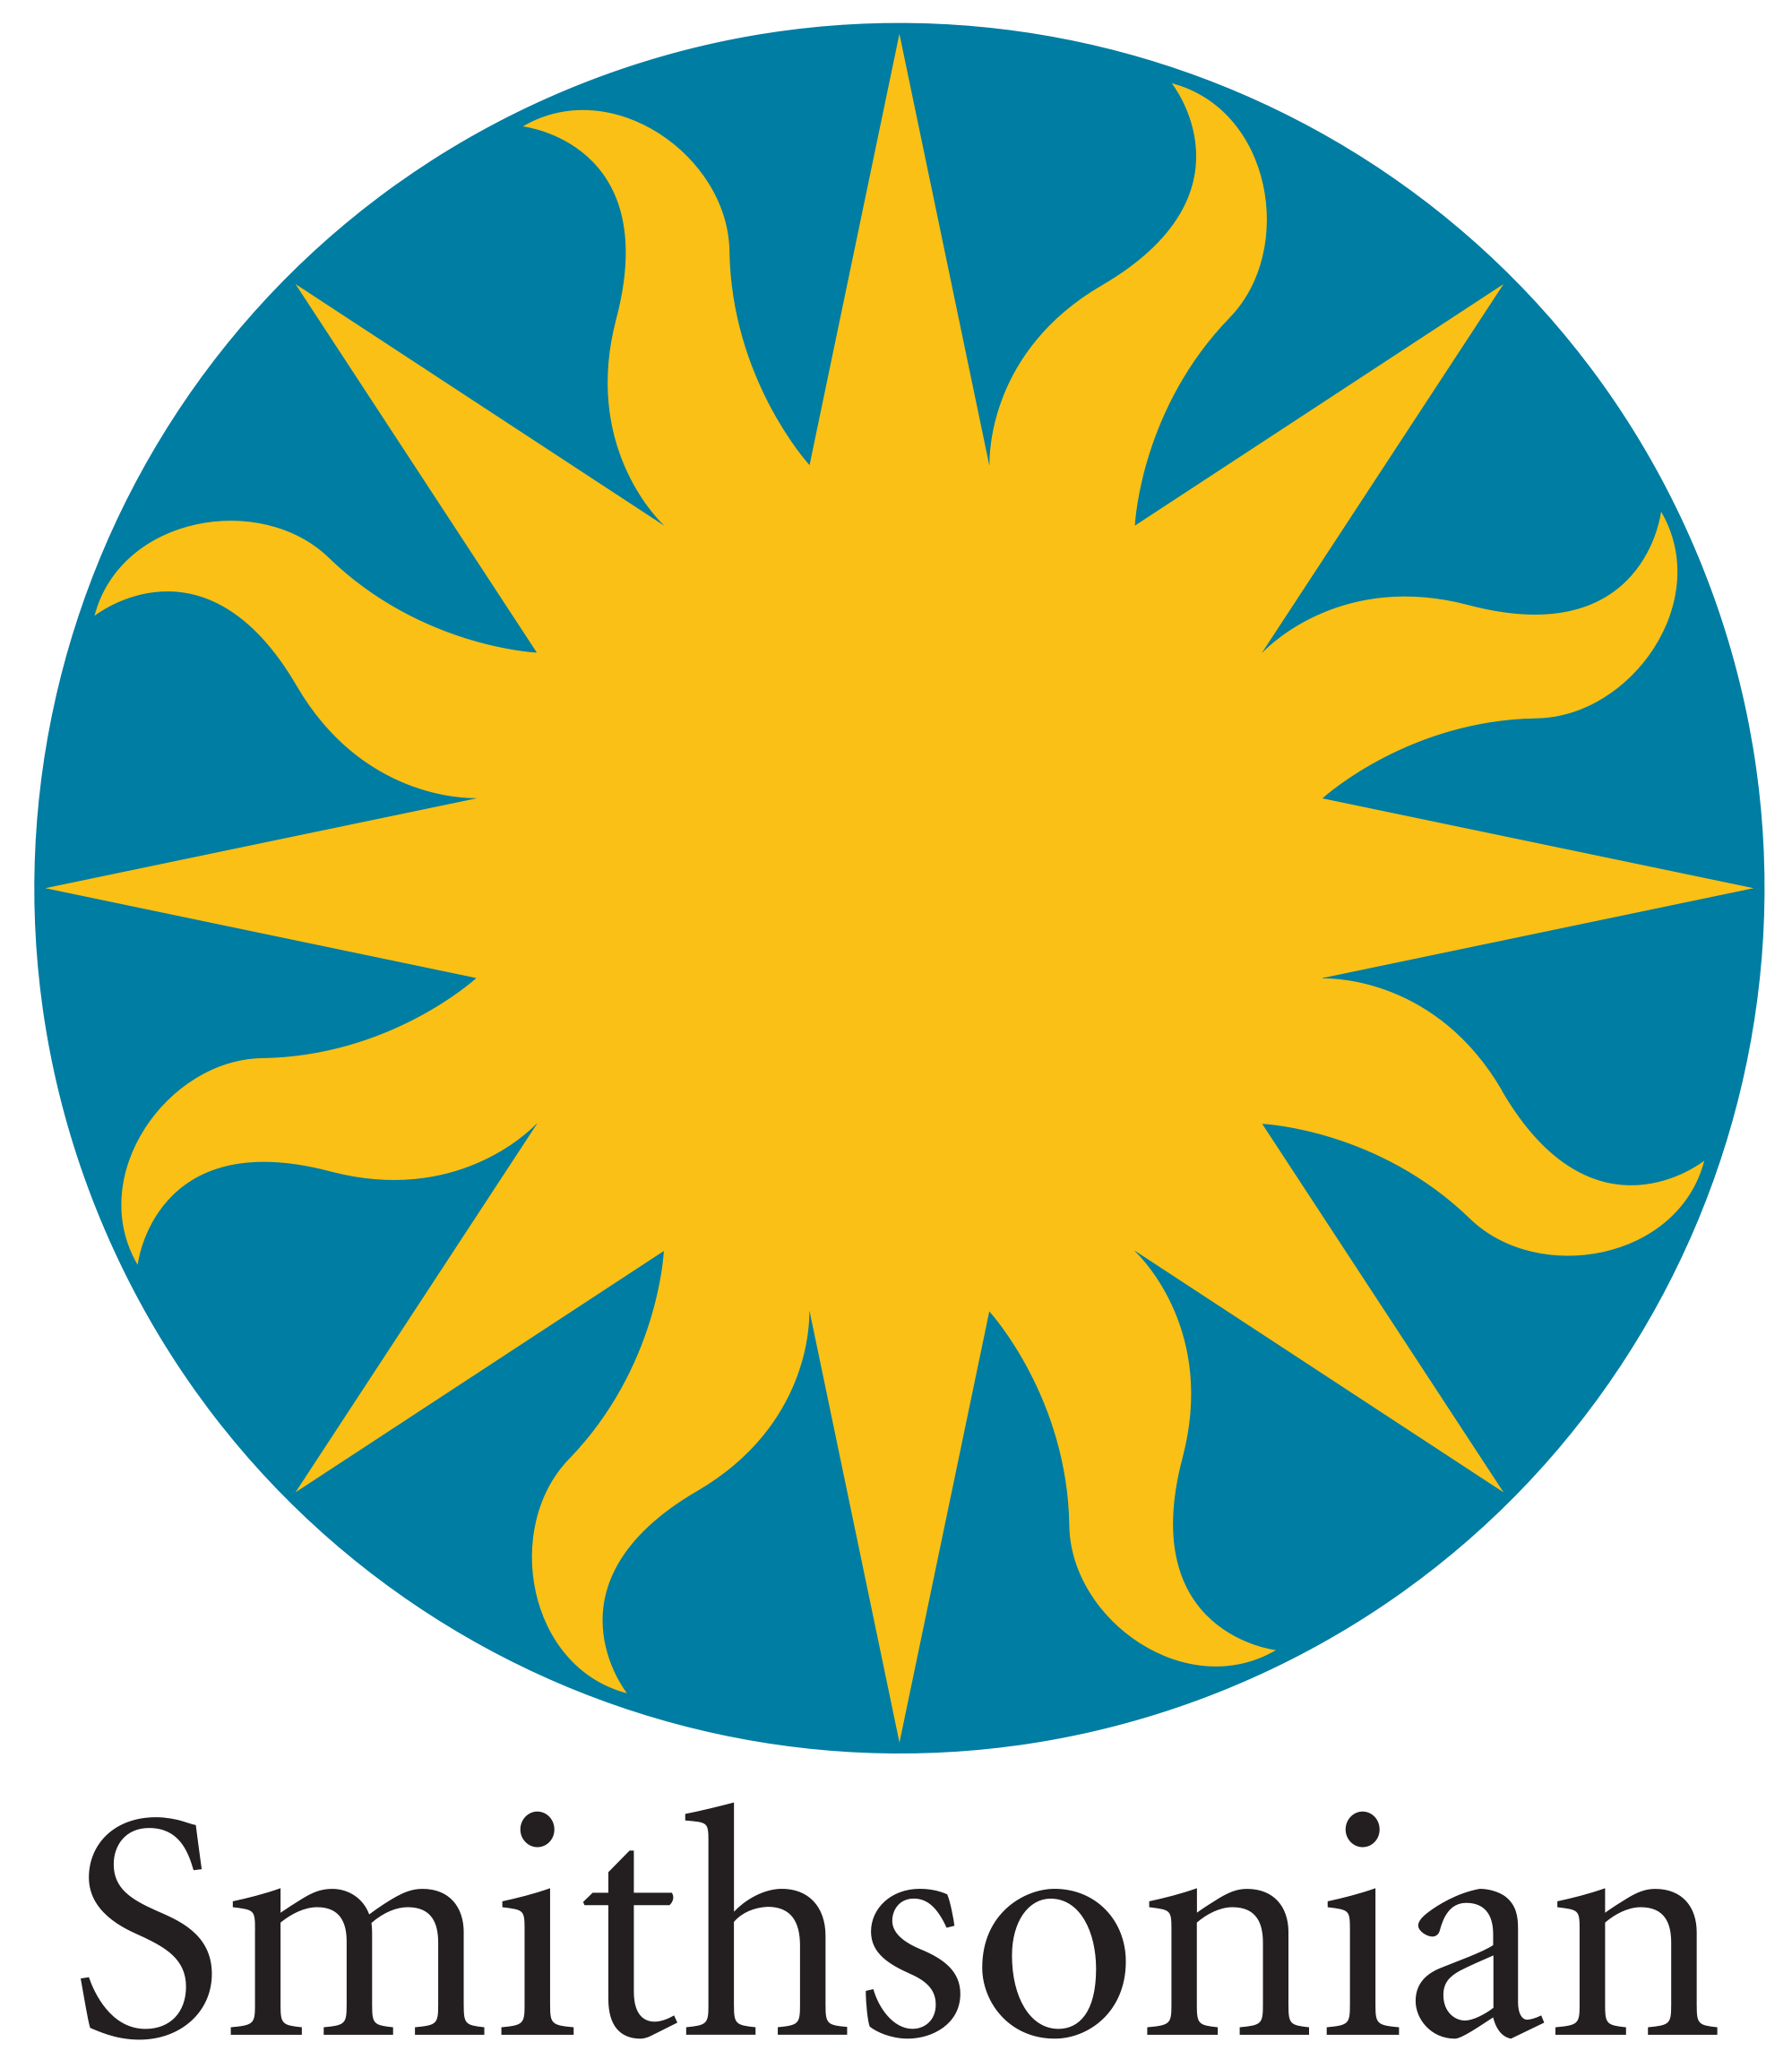 2000px-Smithsonian_logo_color.svg.png